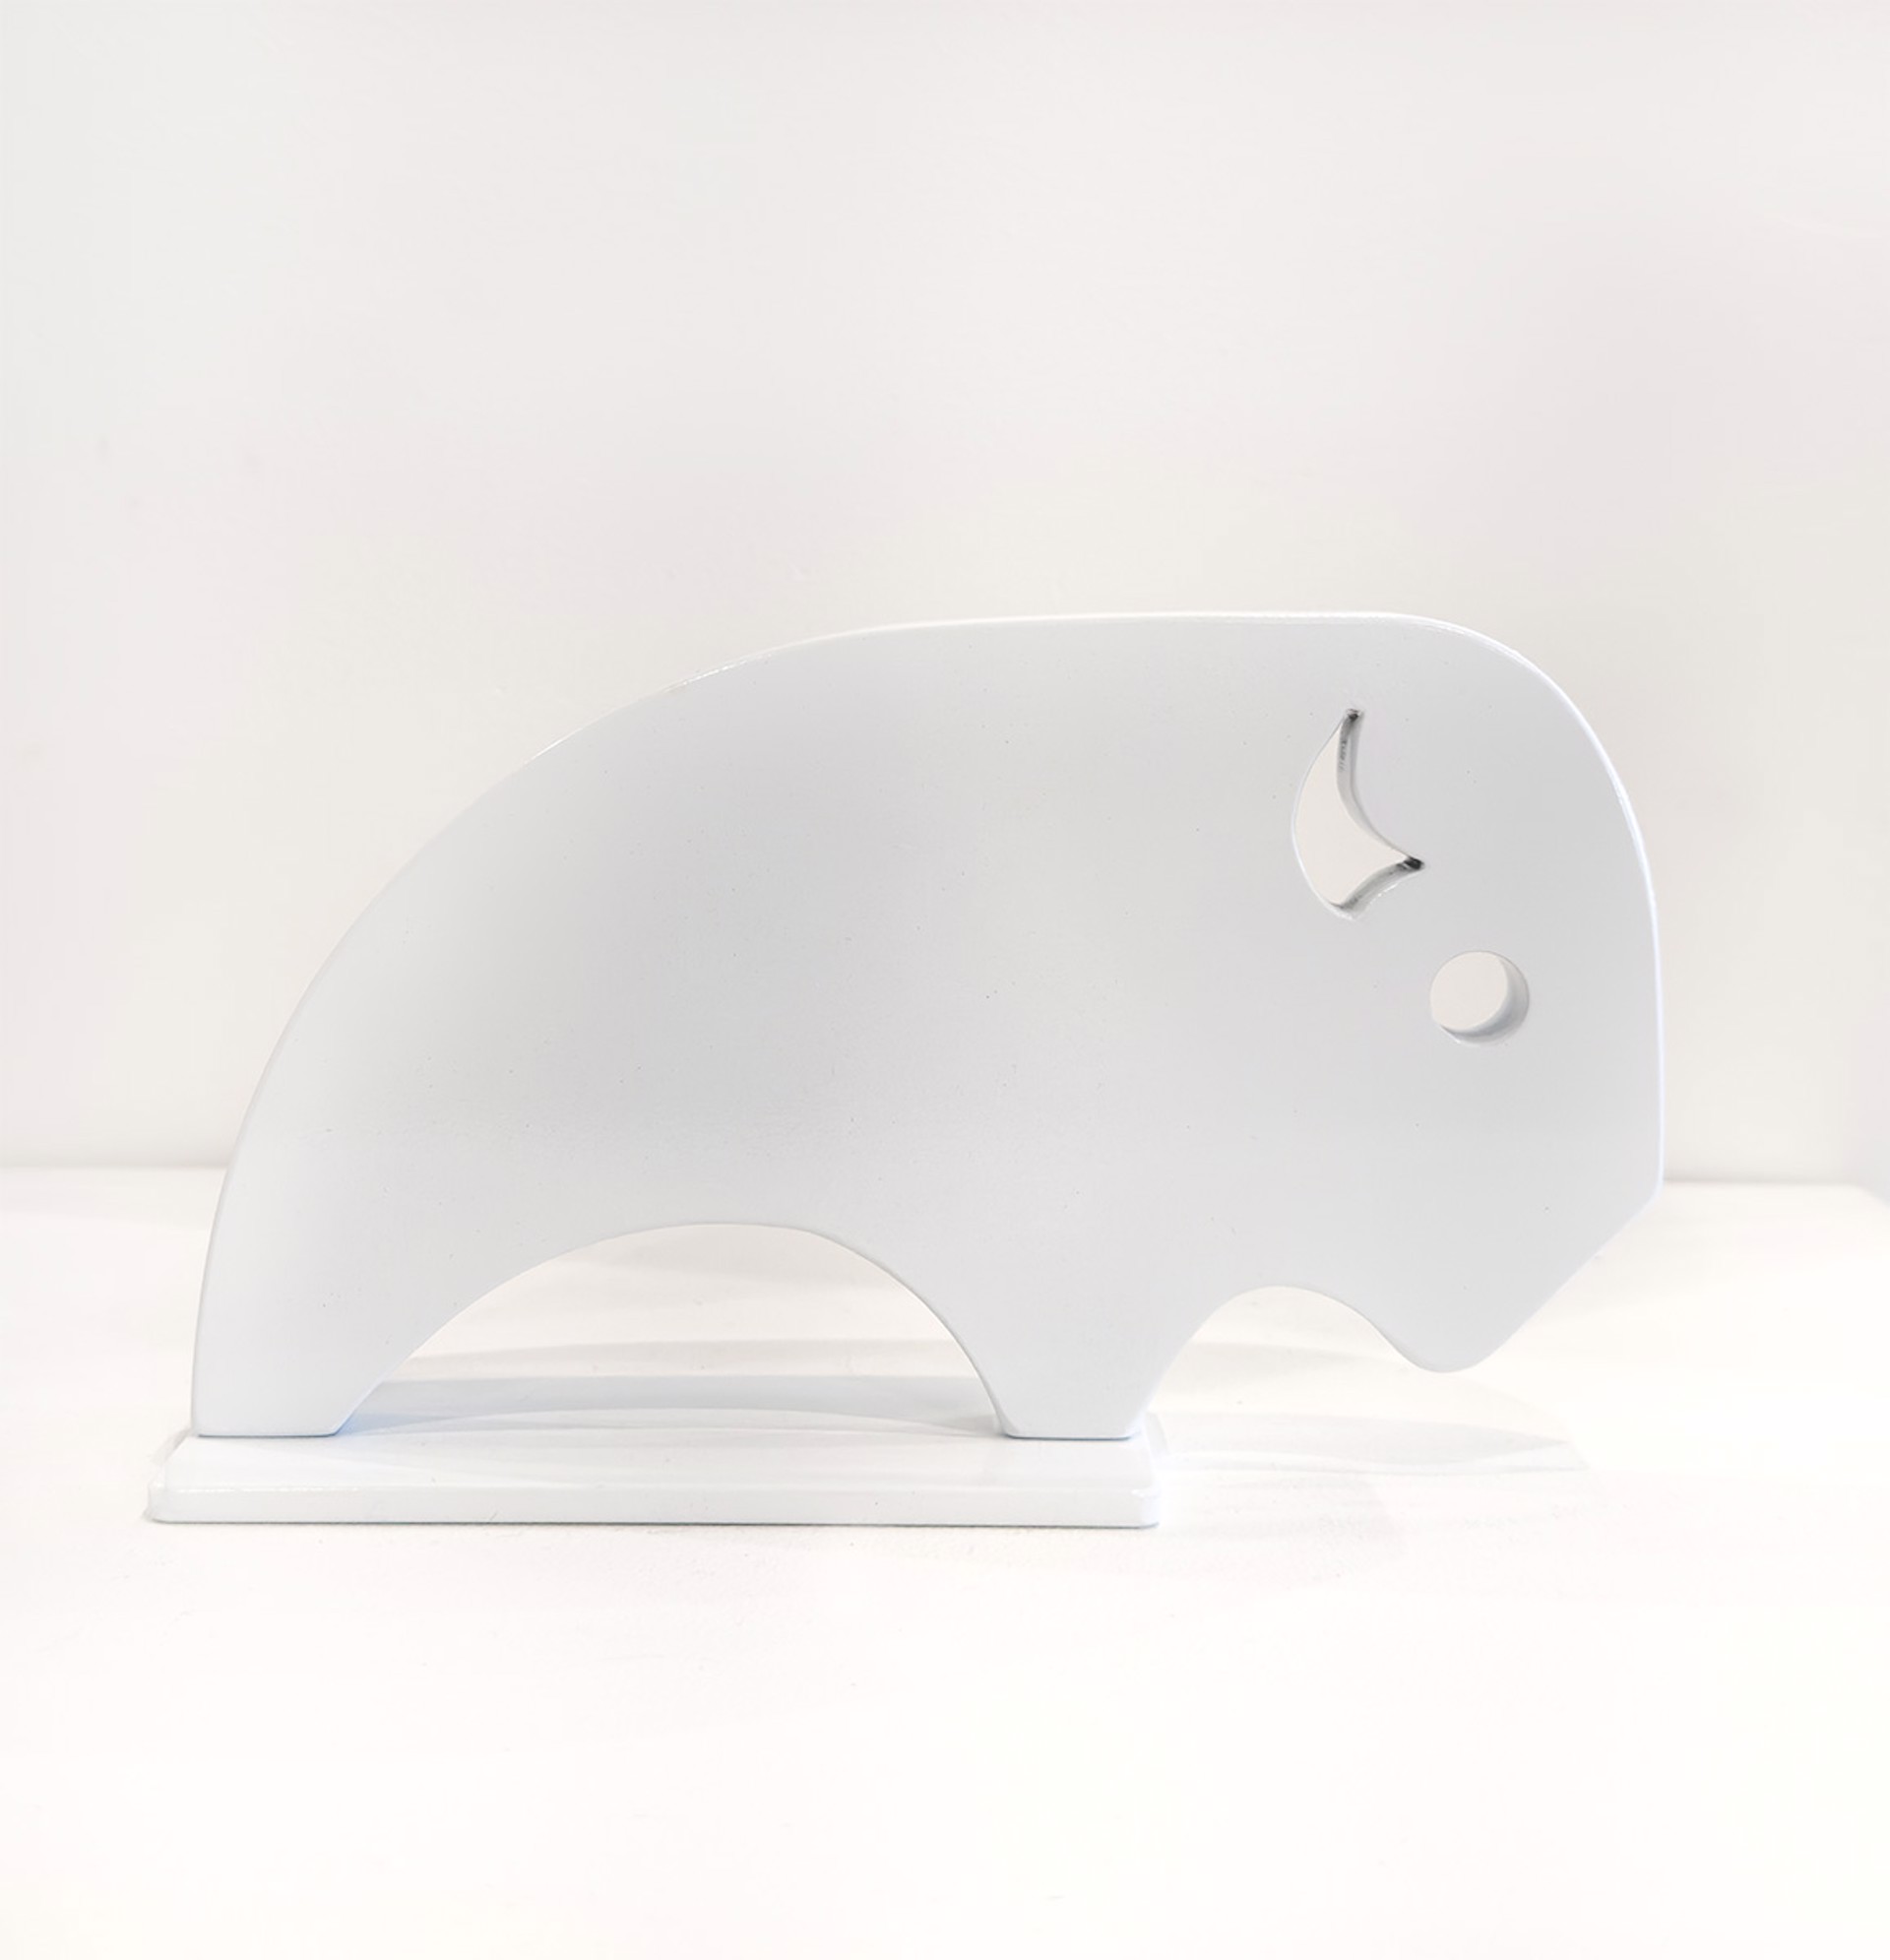 Miniature Sculpture By Jeffie Brewer Featuring A White Buffalo In Simplified Shapes